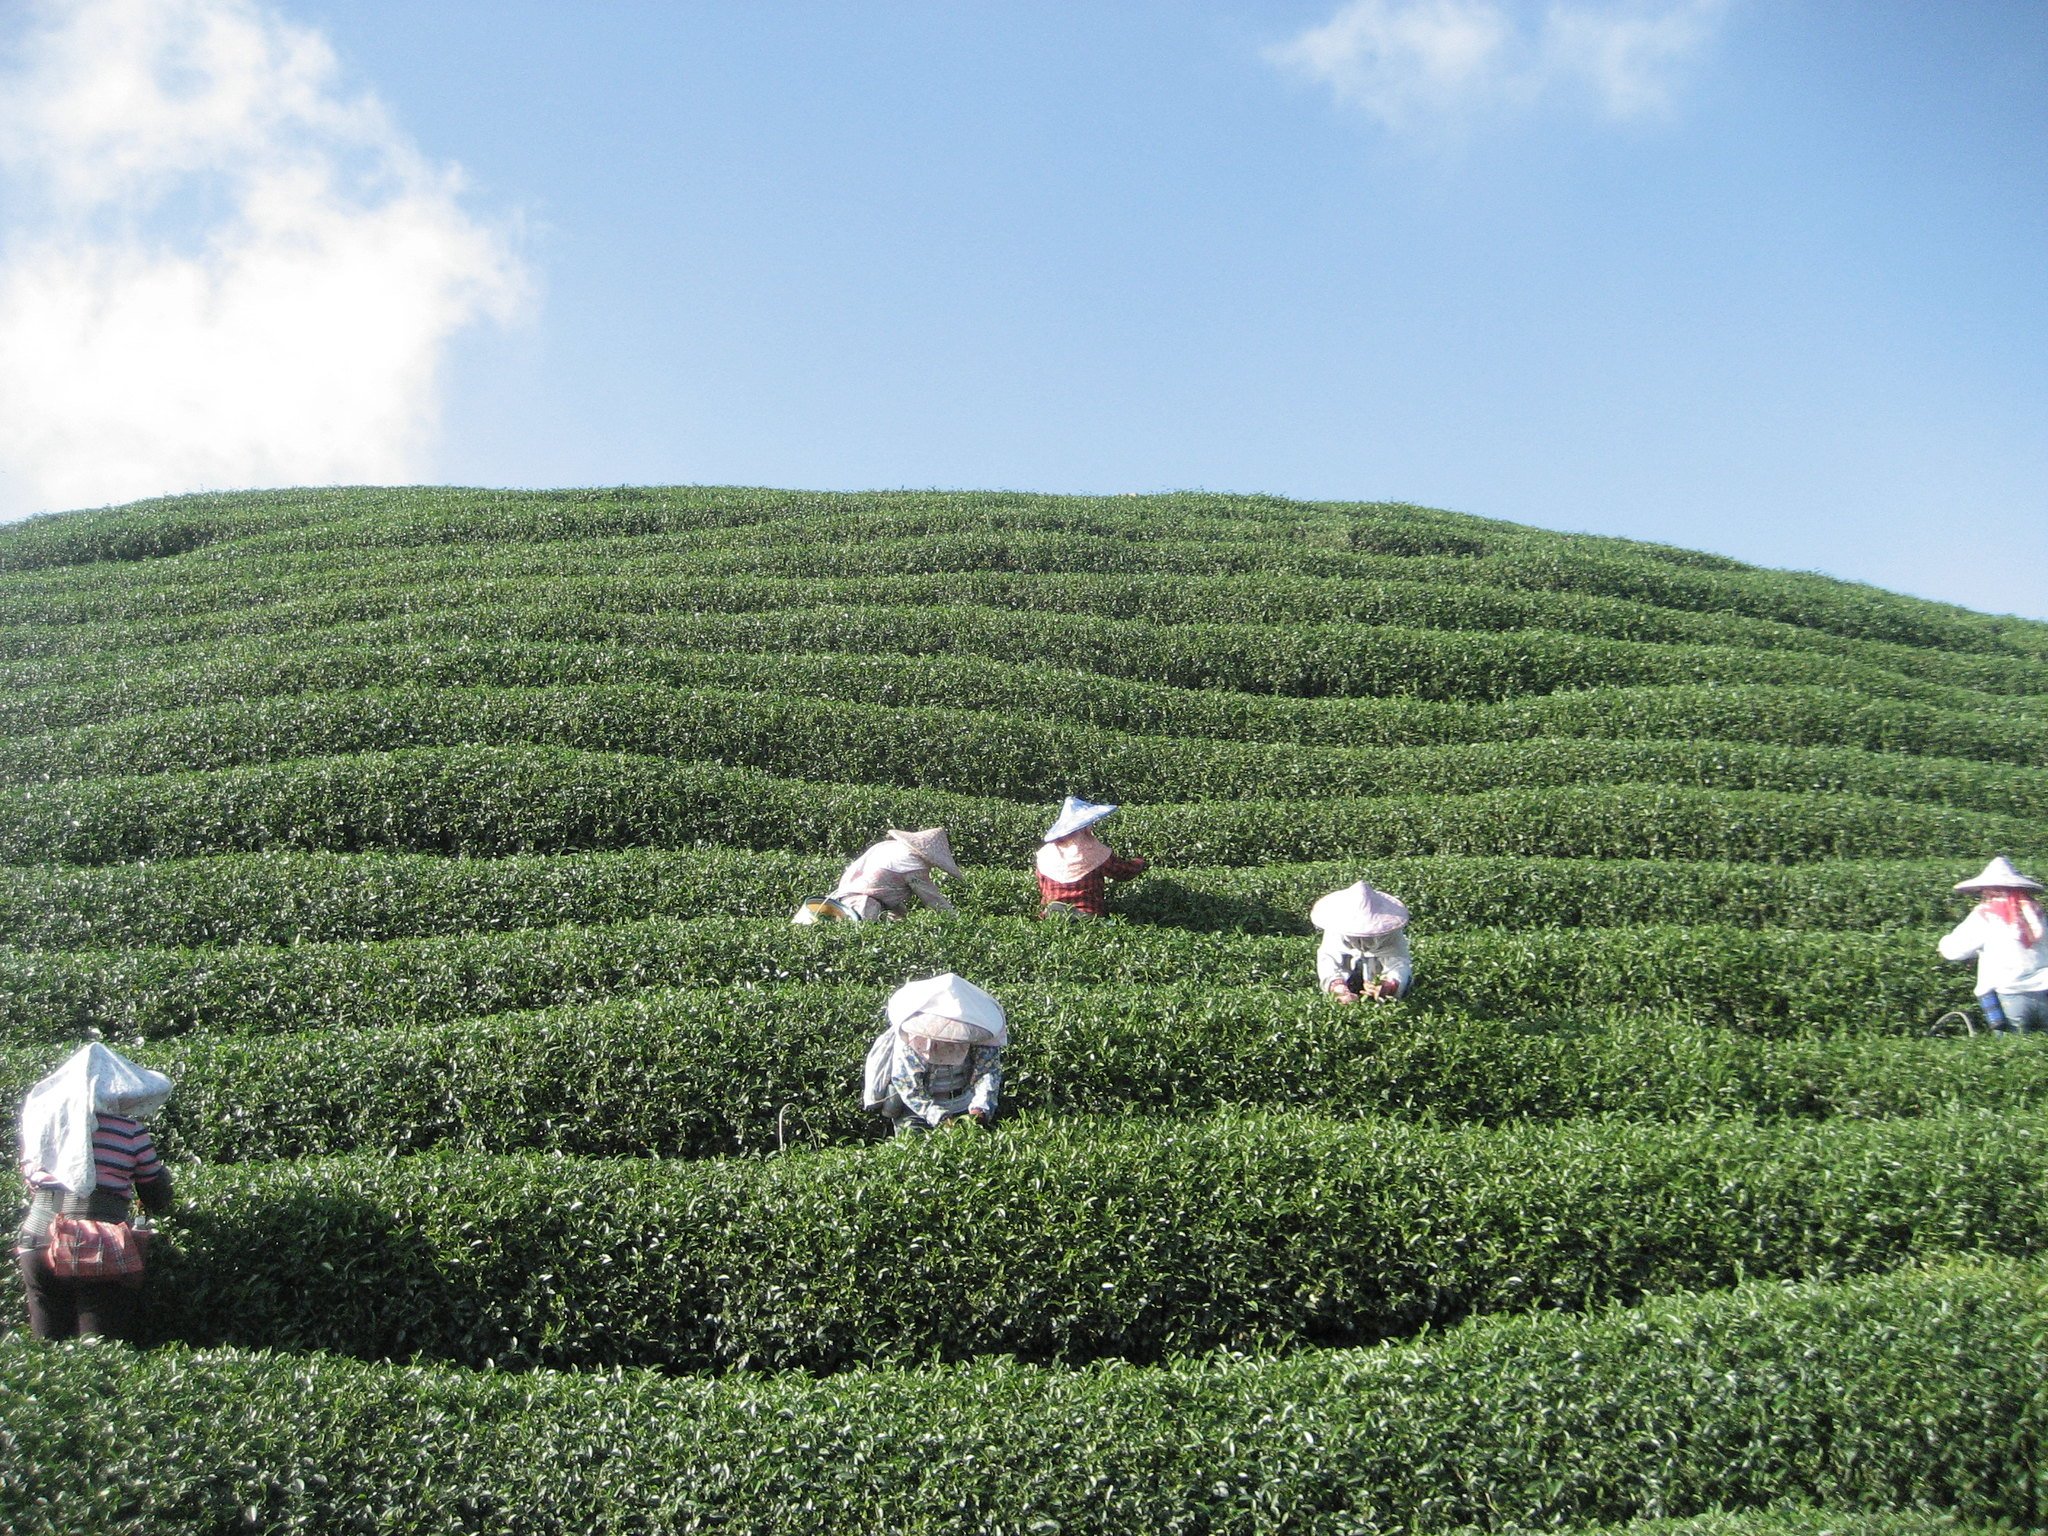 Tea Pickers Harvesting during the Fall Harvest